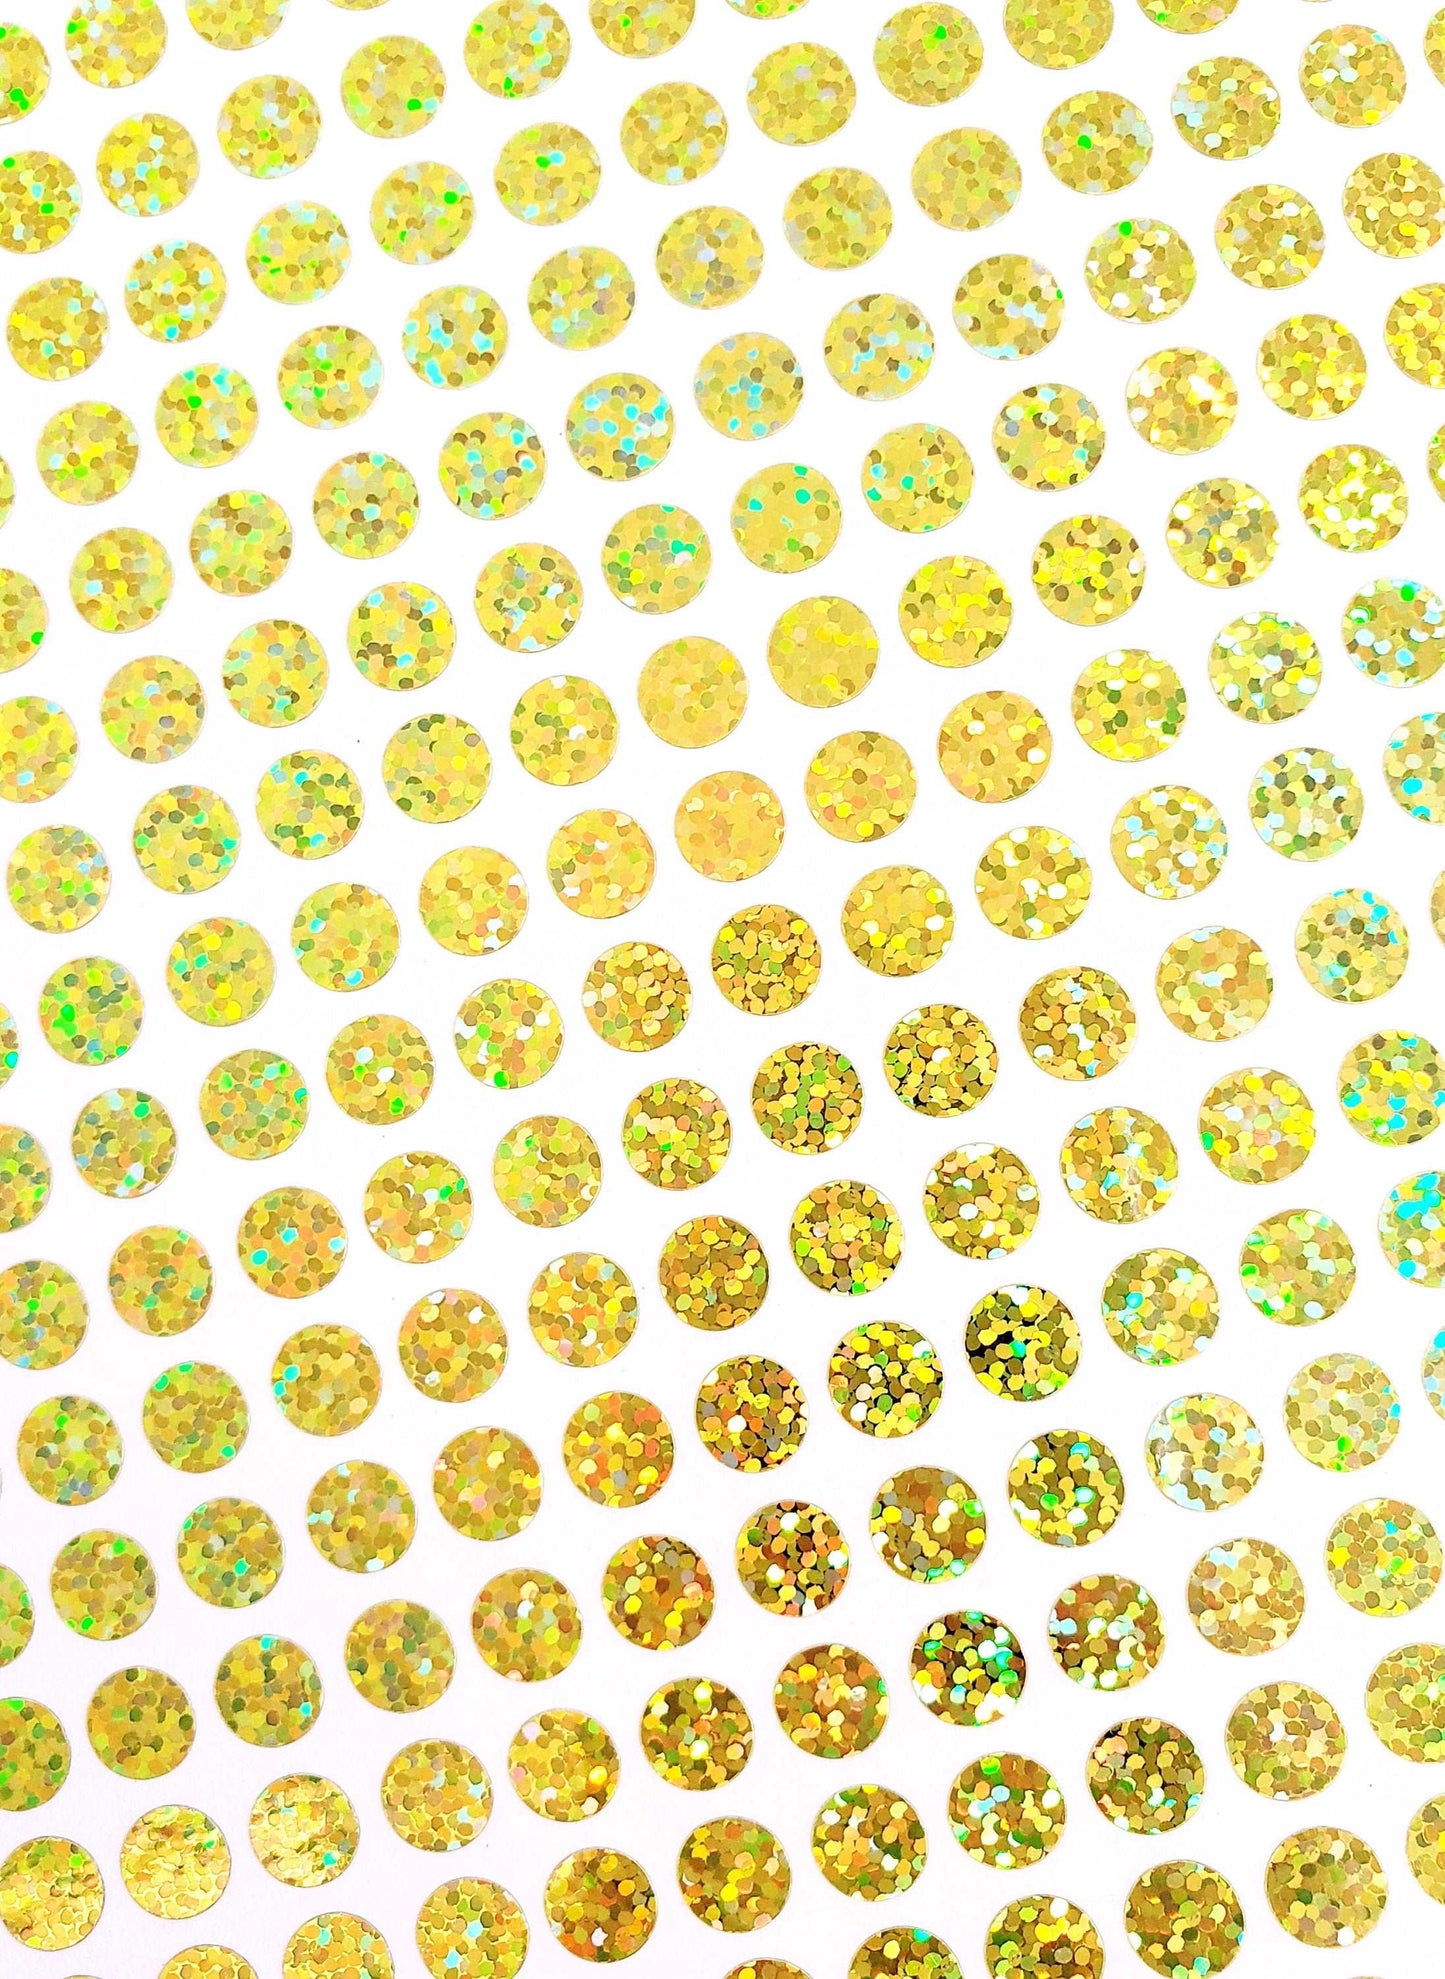 Yellow Dot Glitter Stickers, set of 150 or 400 yellow glitter dot vinyl decals, birthday party drink cup stickers, chores chart dots